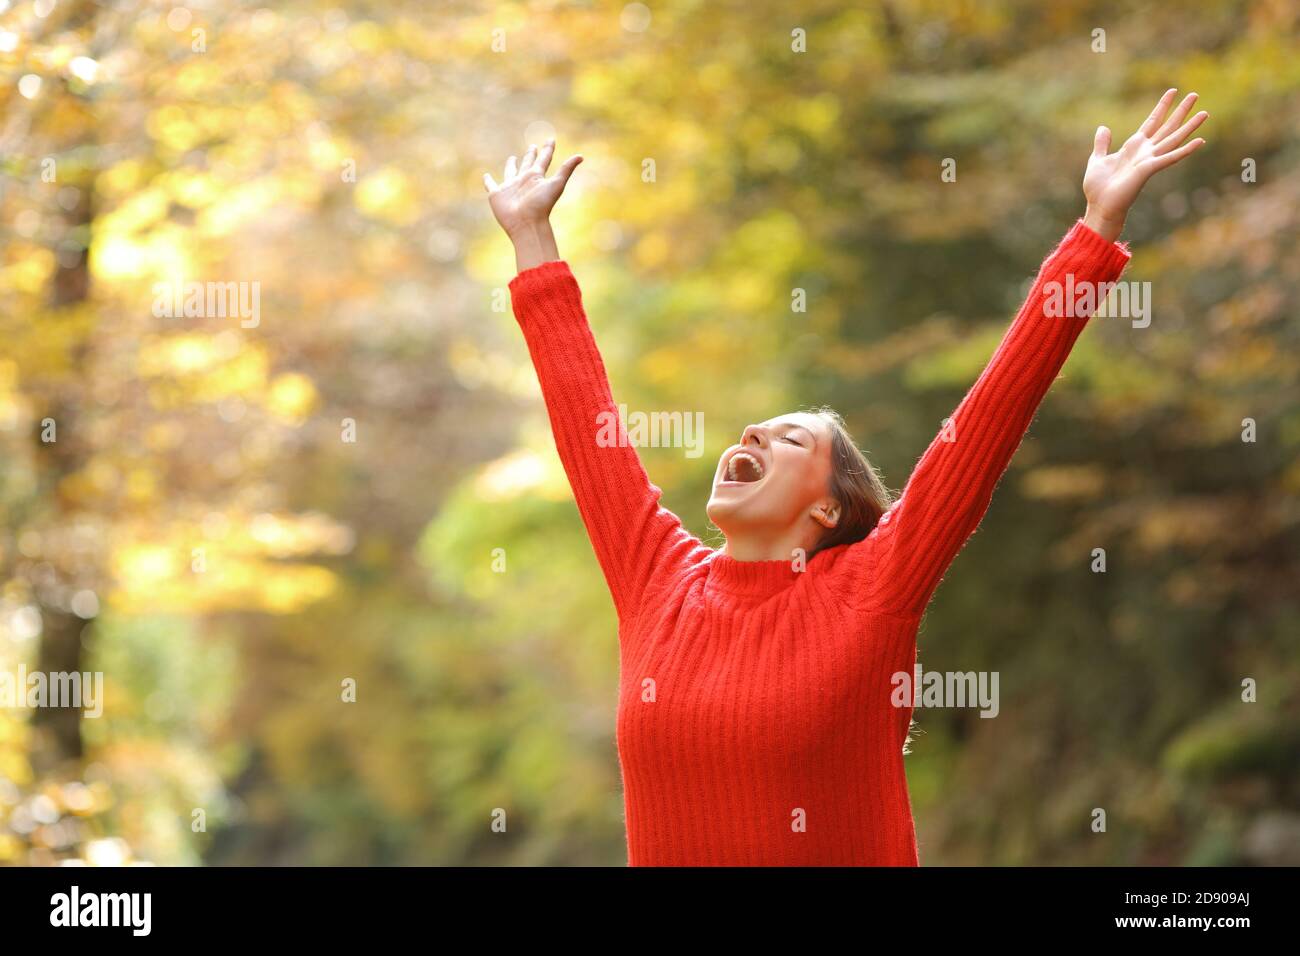 Excited woman wearing red sweater celebrating success raising arms in a forest or park in autumn season Stock Photo